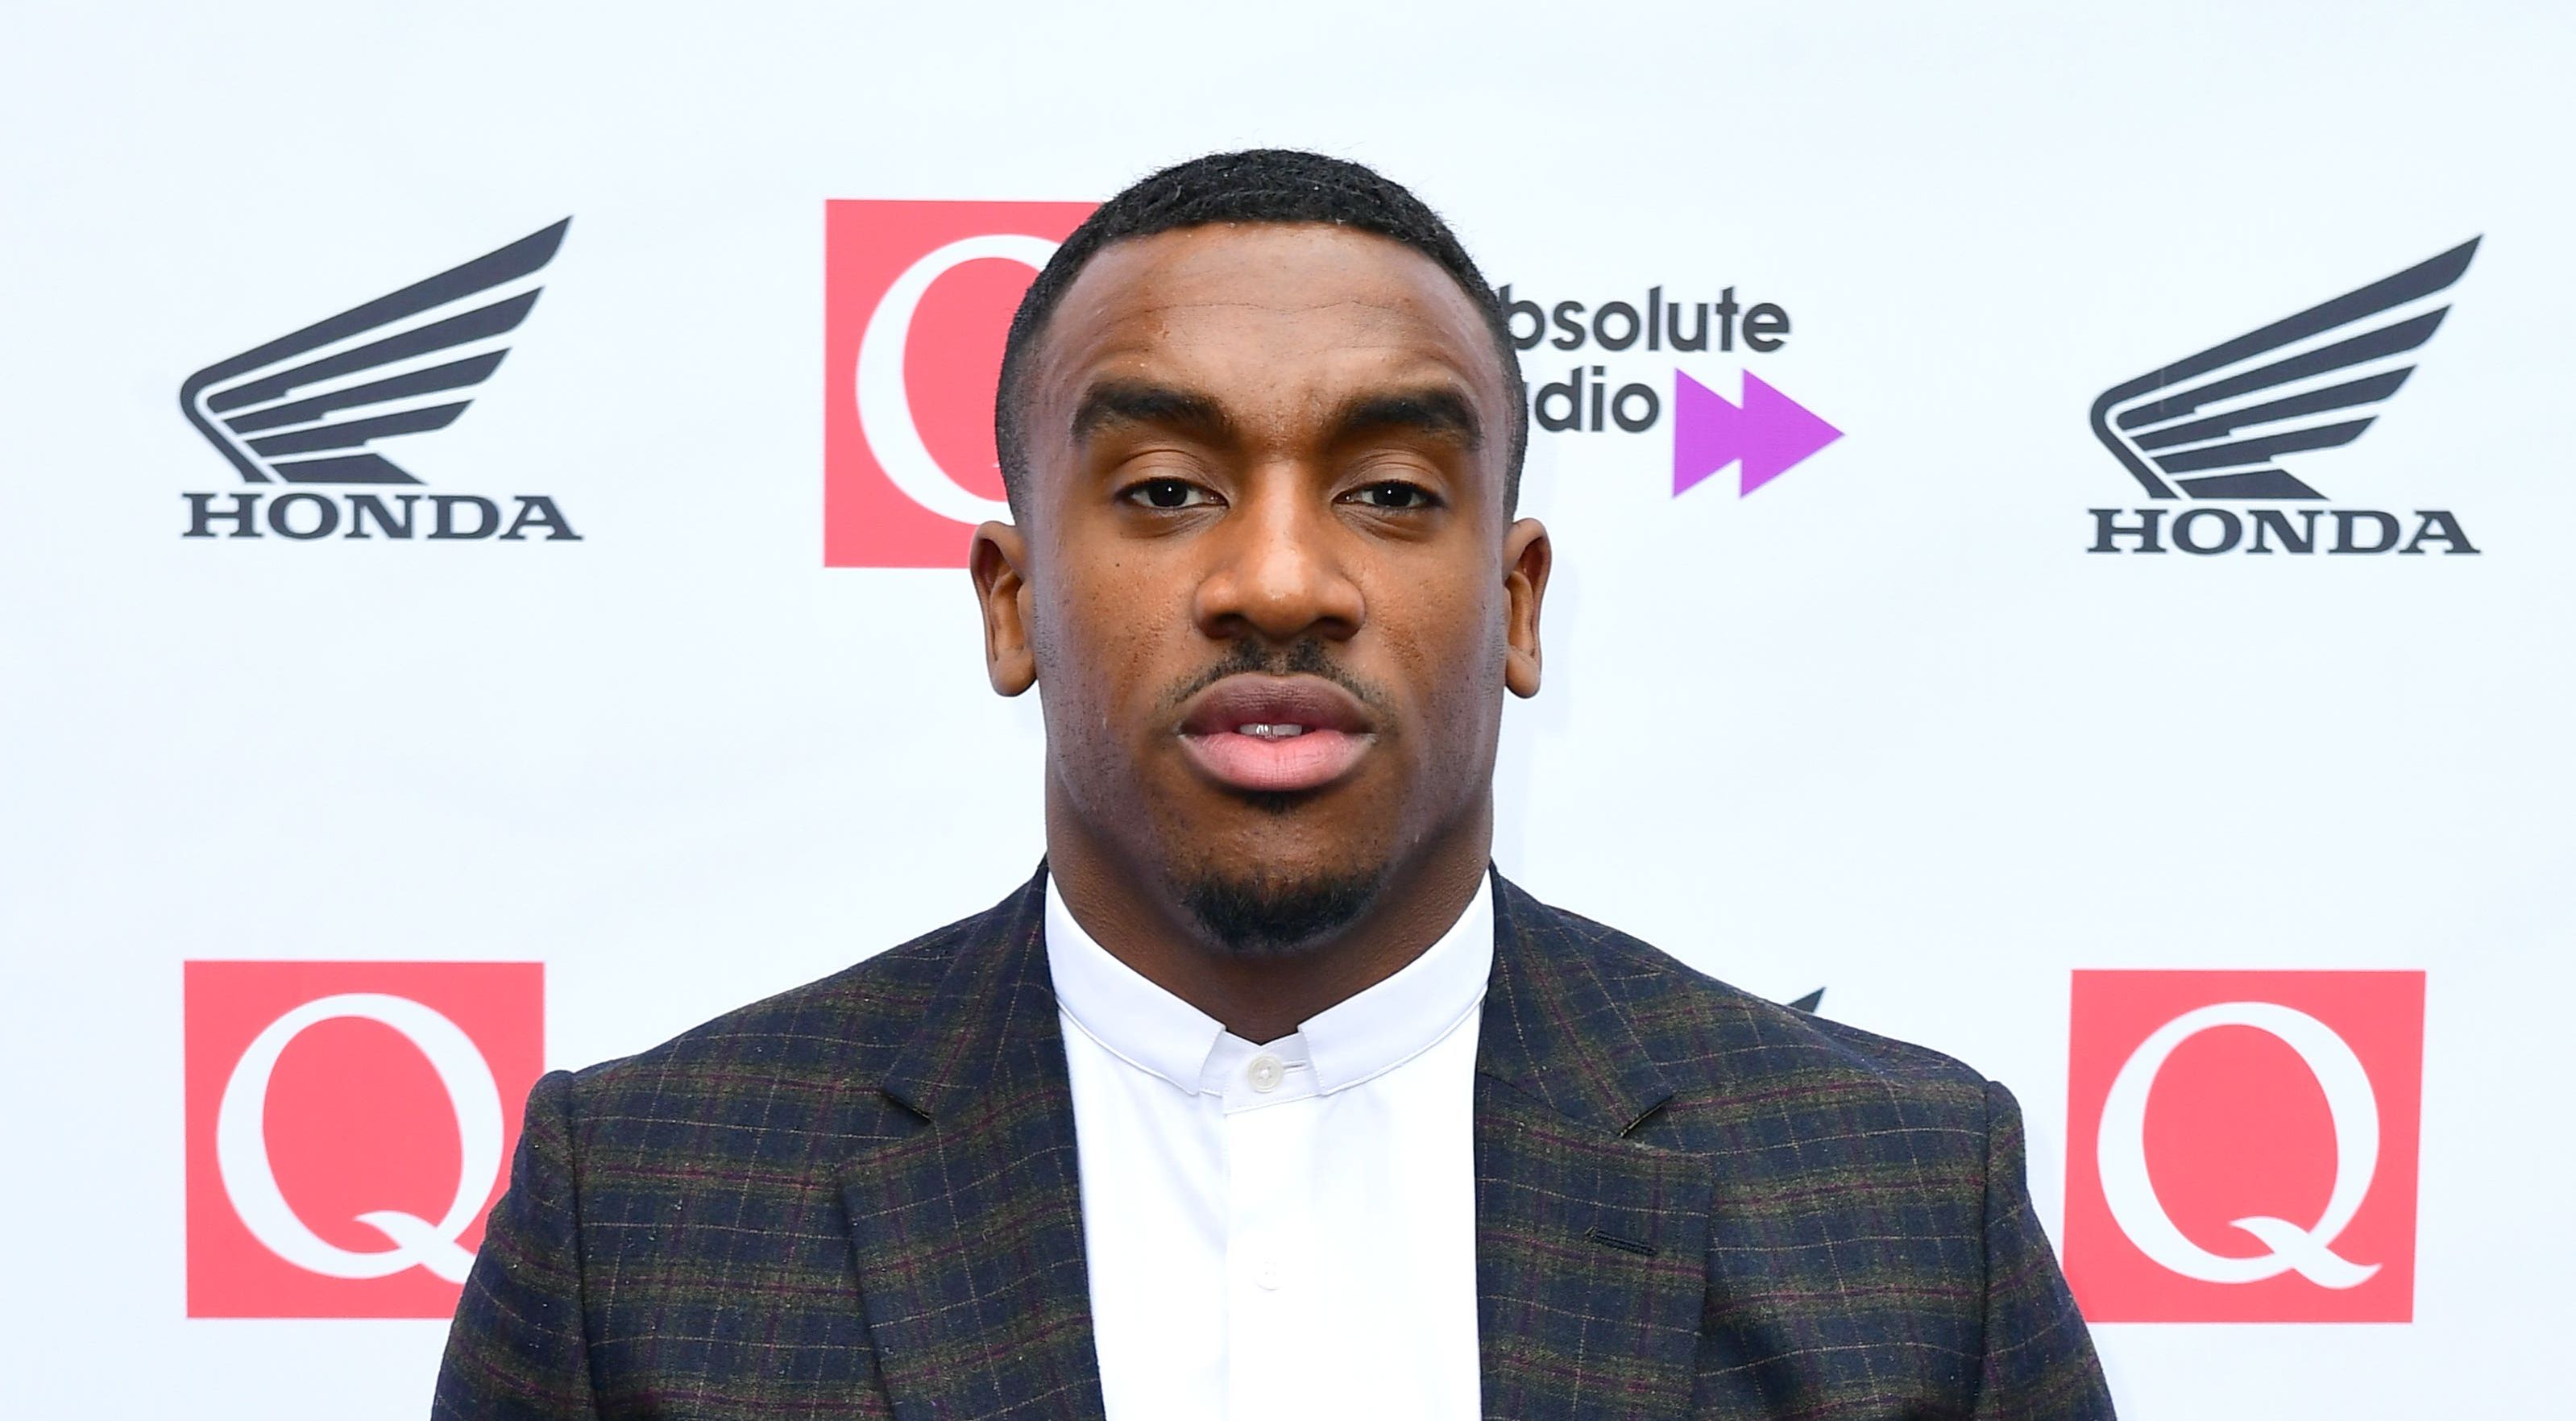 Rapper Bugzy Malone cleared after fracturing two men's jaws